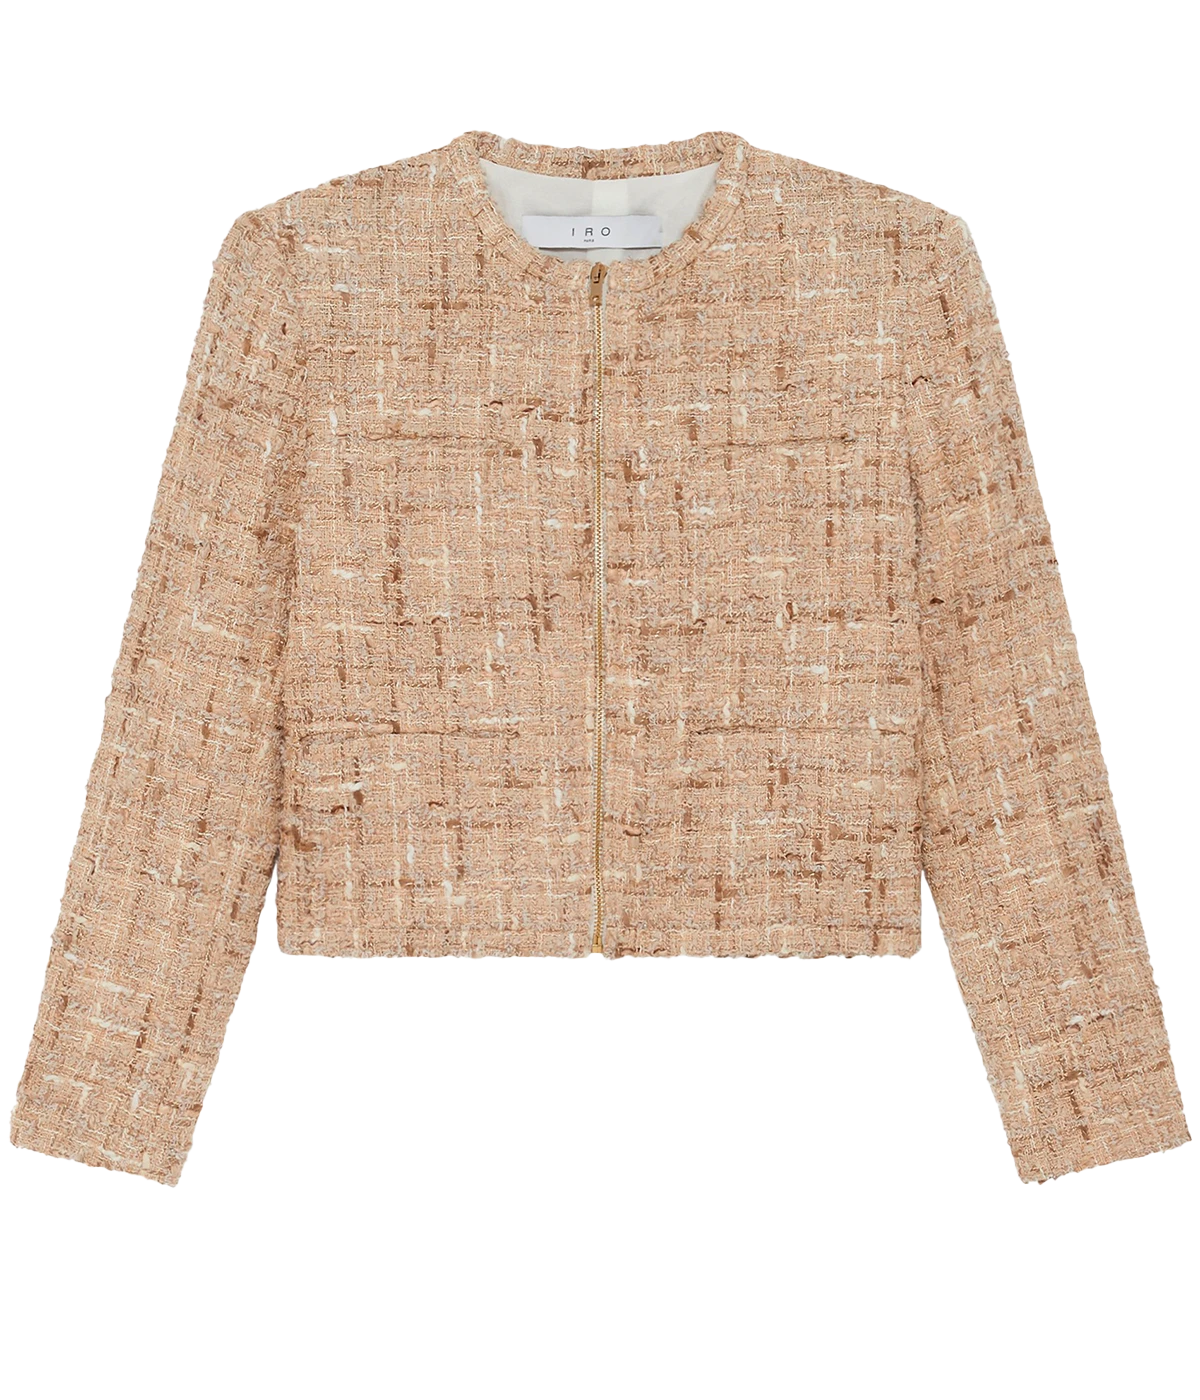 A light beige tweed long sleeve casual jacket, with round neckline, front pockets, checkered tweed pattern, gold harwear and walt pockets. Chanel inspired, throw on and go, long sleeves, bra friendly, matching set. 